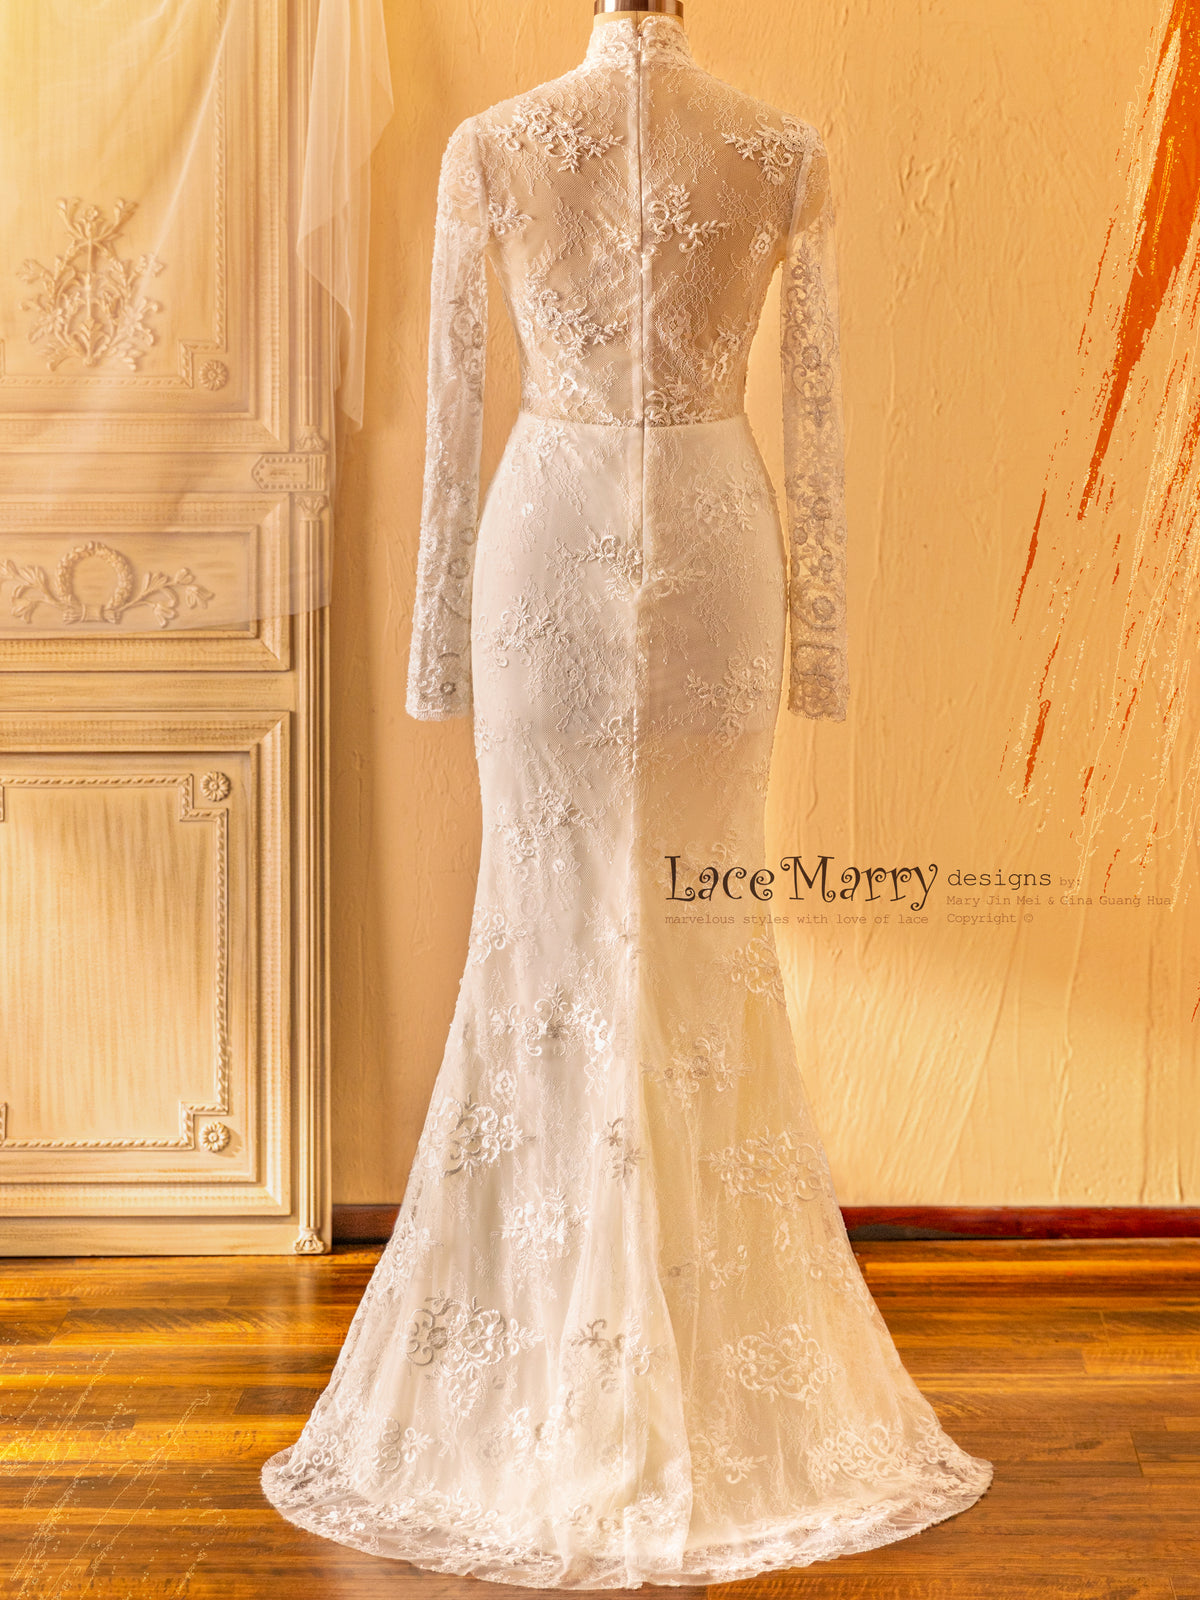 Full Lace Back Wedding Dress with Long Sleeves